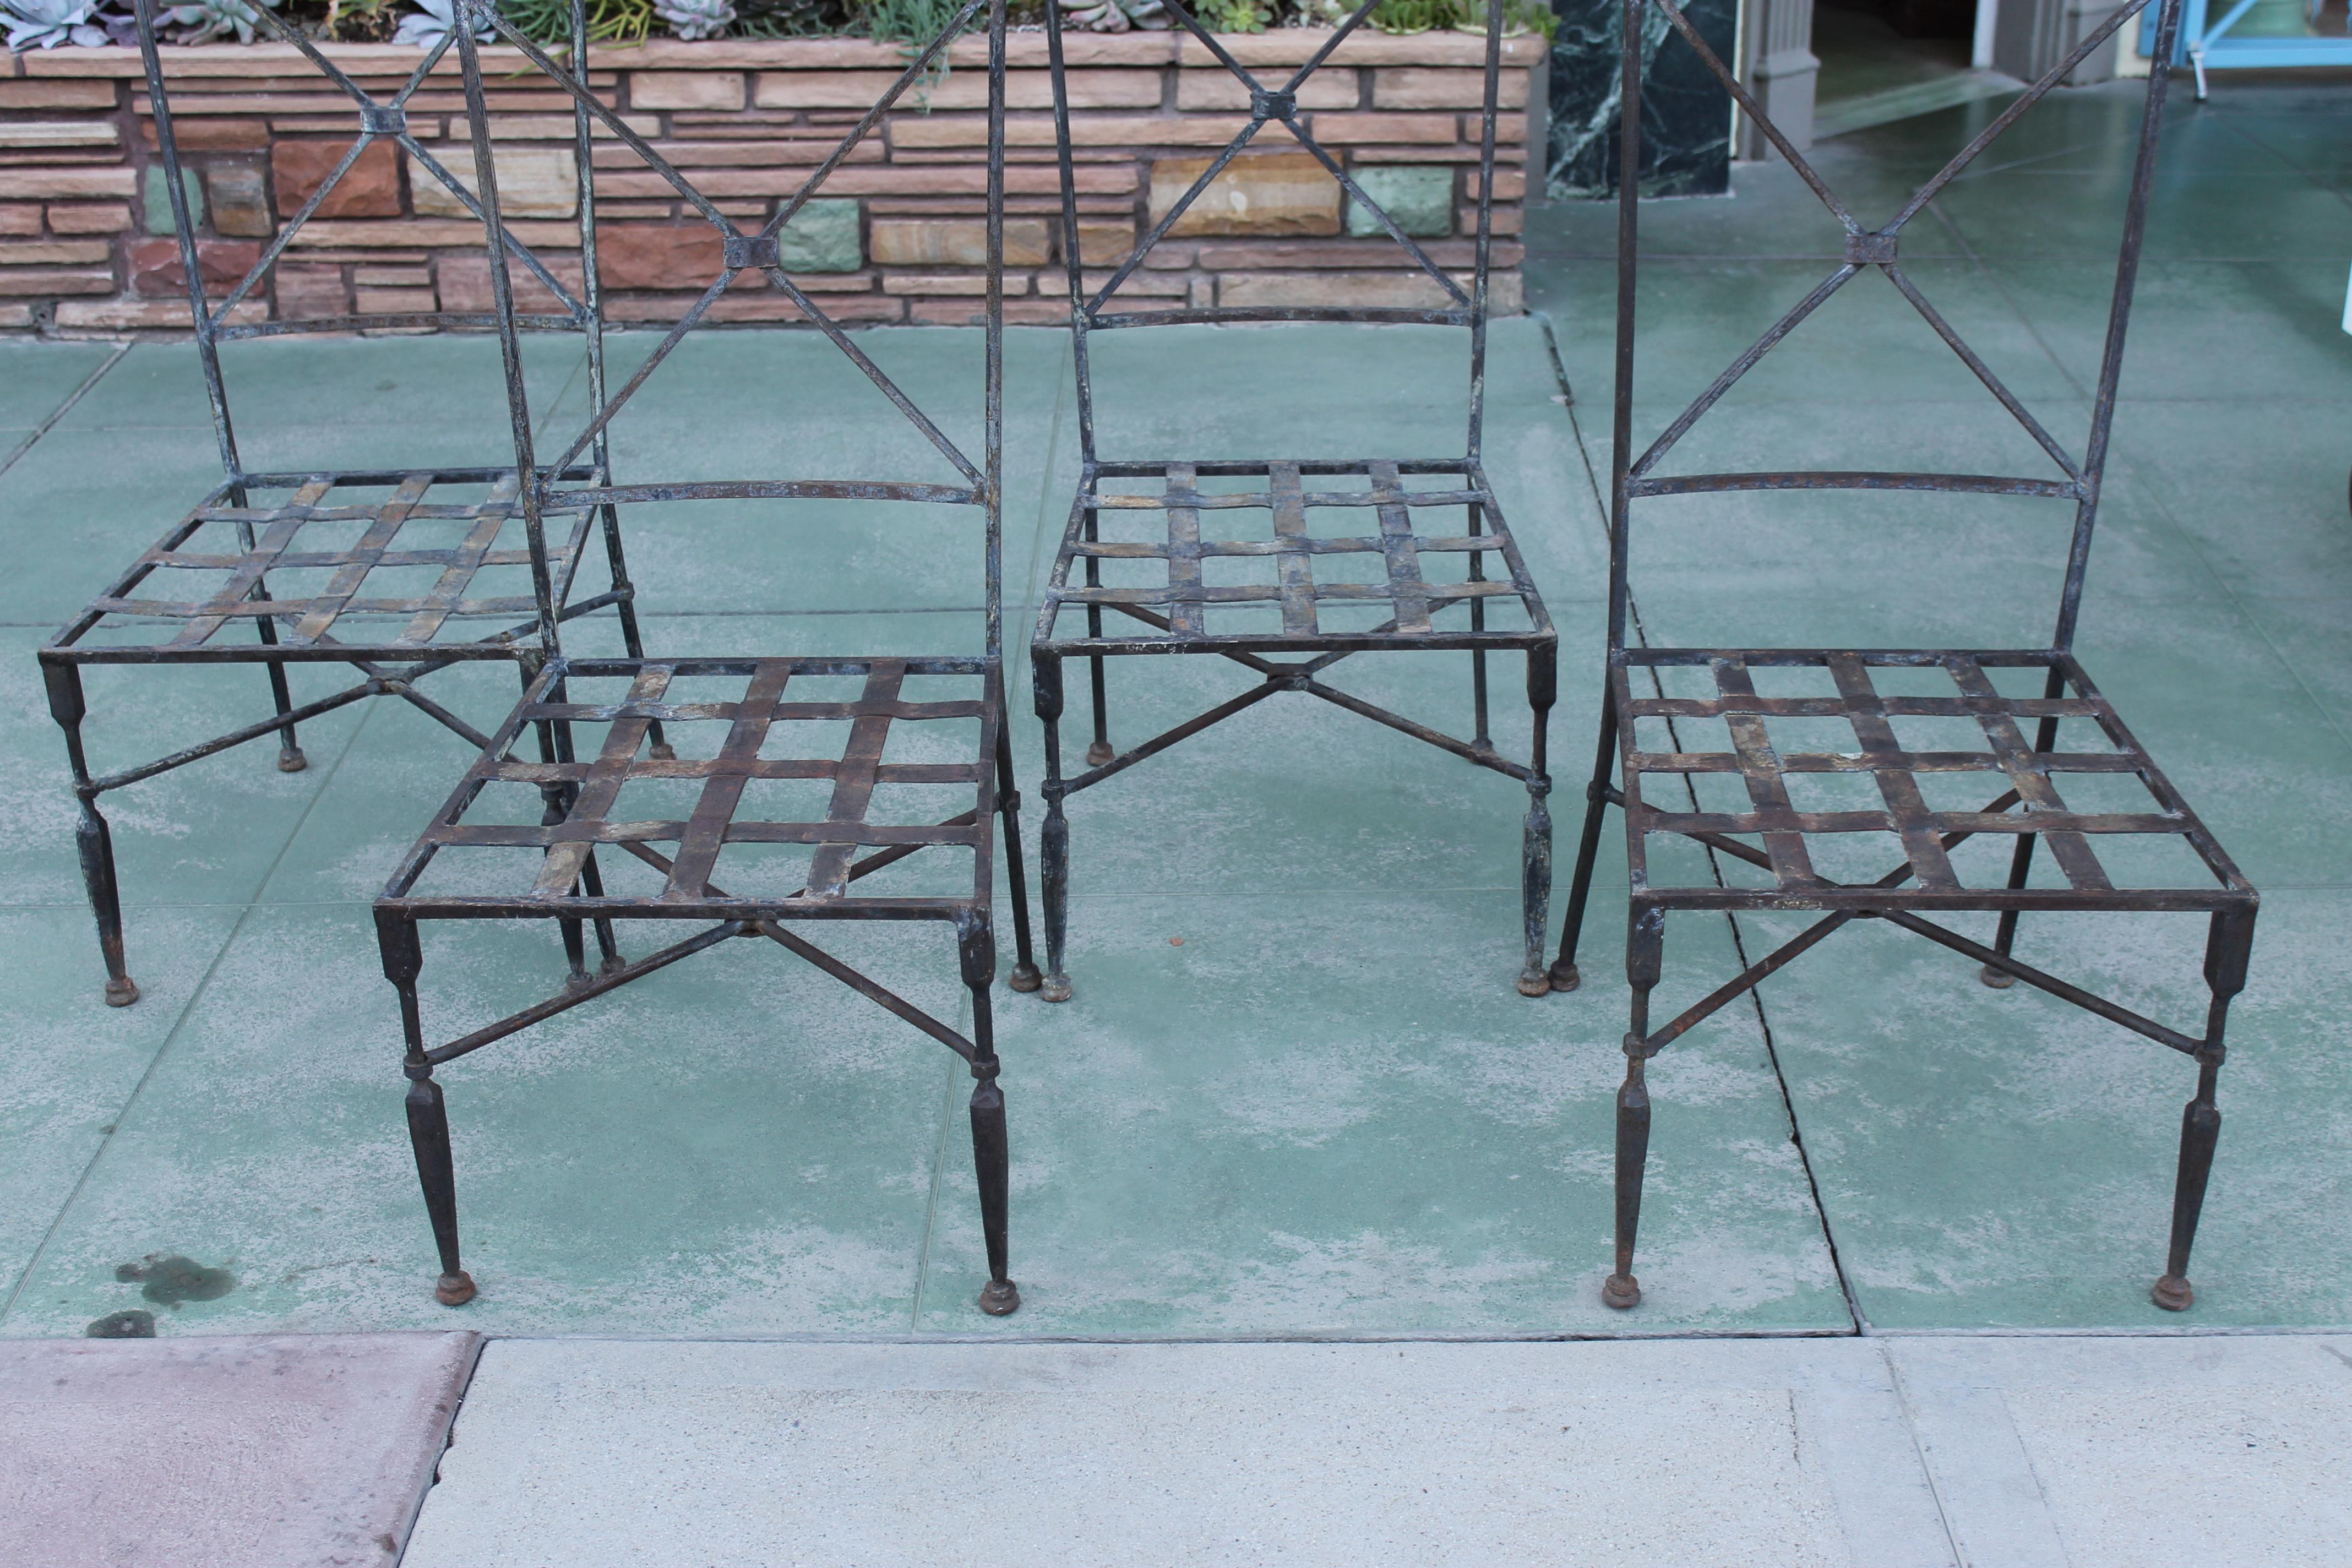 A set of four handsome hand forged iron chairs in a neoclassical style. Lots of beautiful detail, including forged straps at the intersections of the cross bars and heavy basket weave seats. Front legs are especially good looking. Suitable for